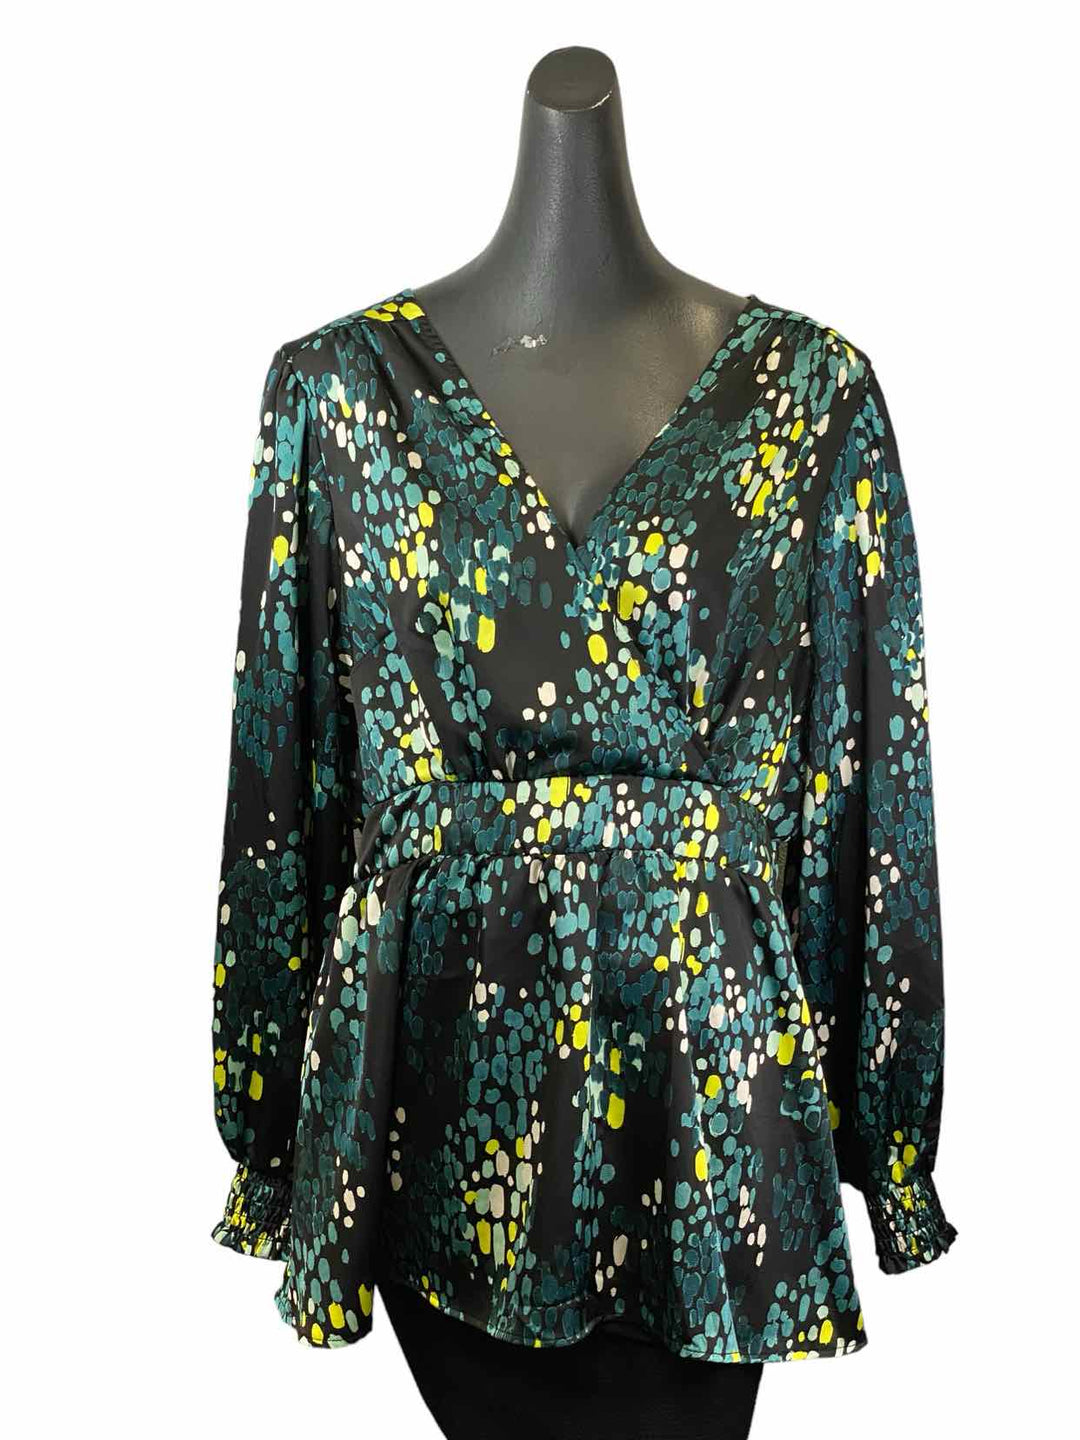 Torrid Size 1(1X) Black Green spotted Long Sleeve Shirts